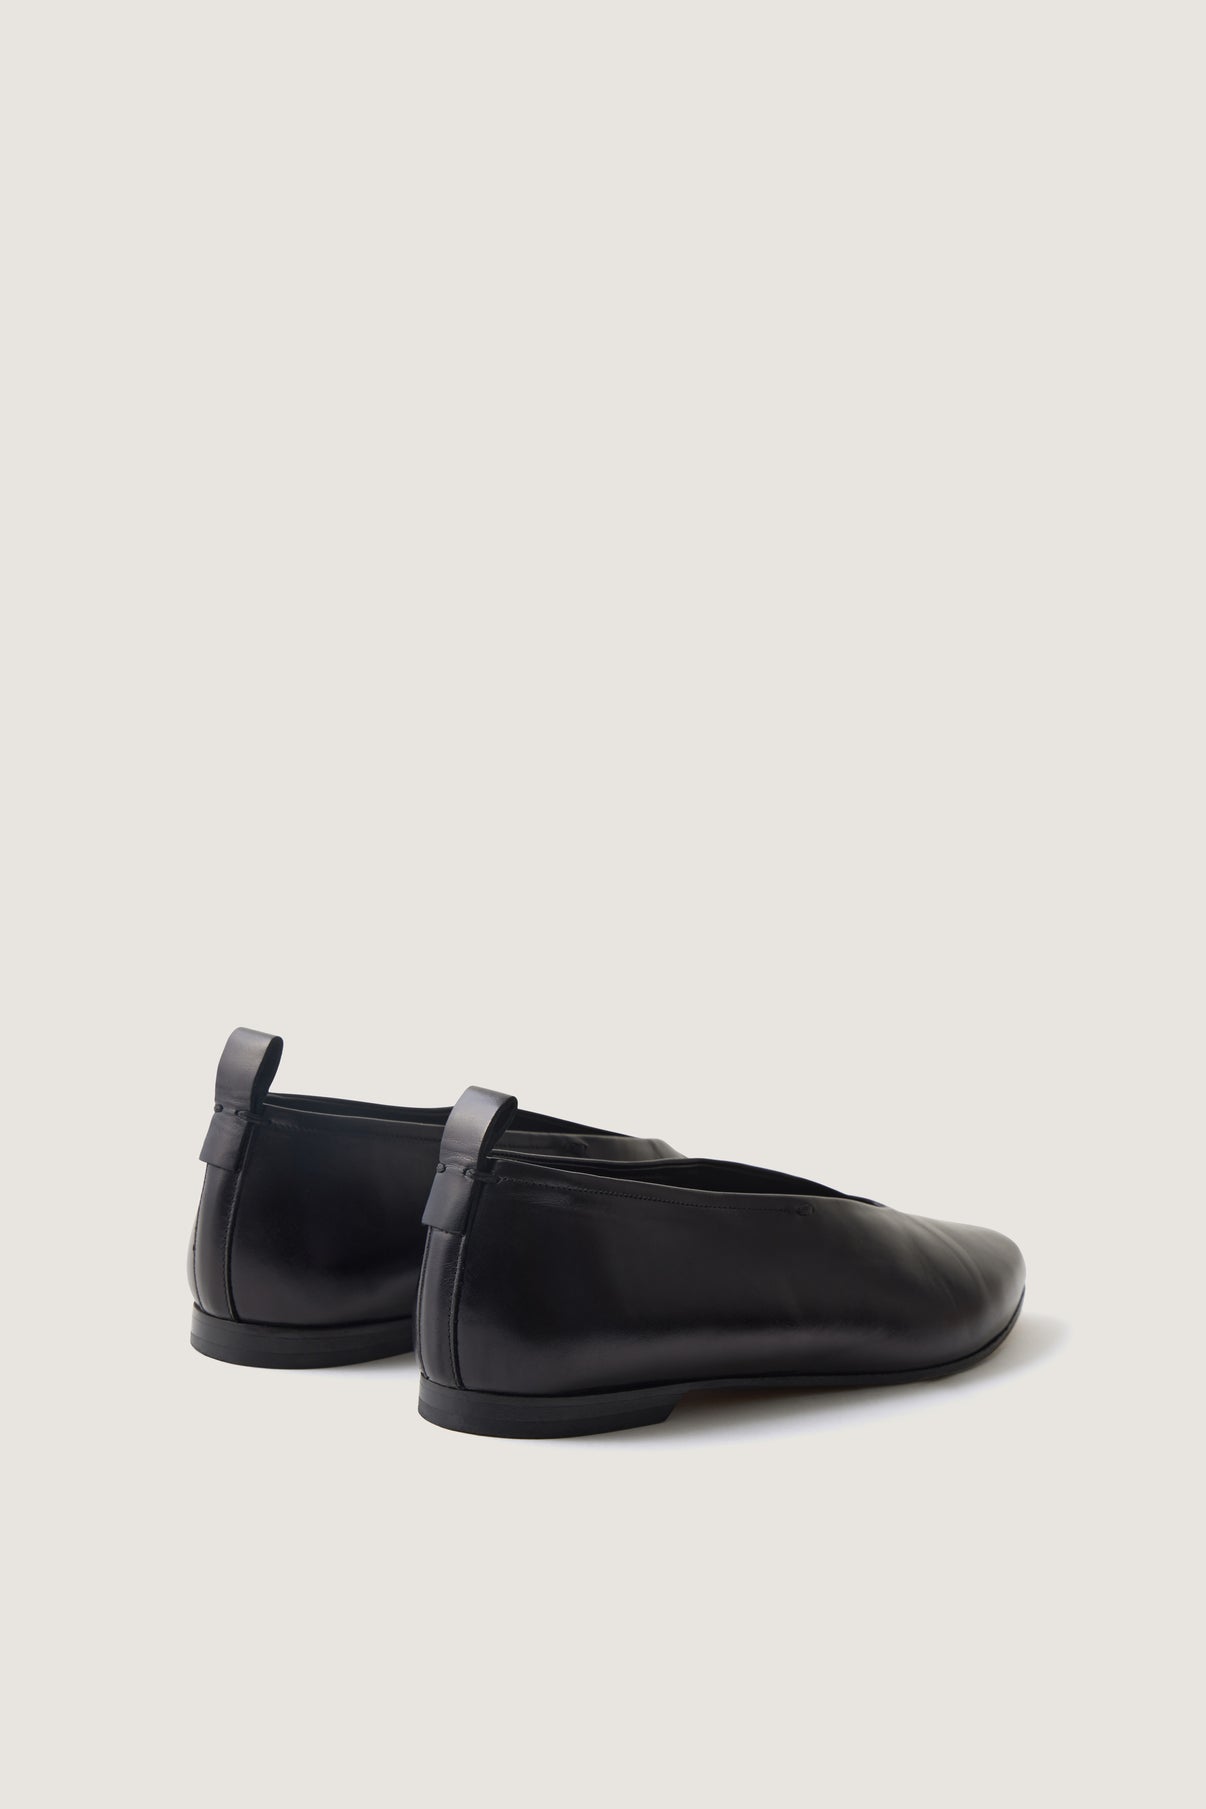 AVA LOAFERS vue 5